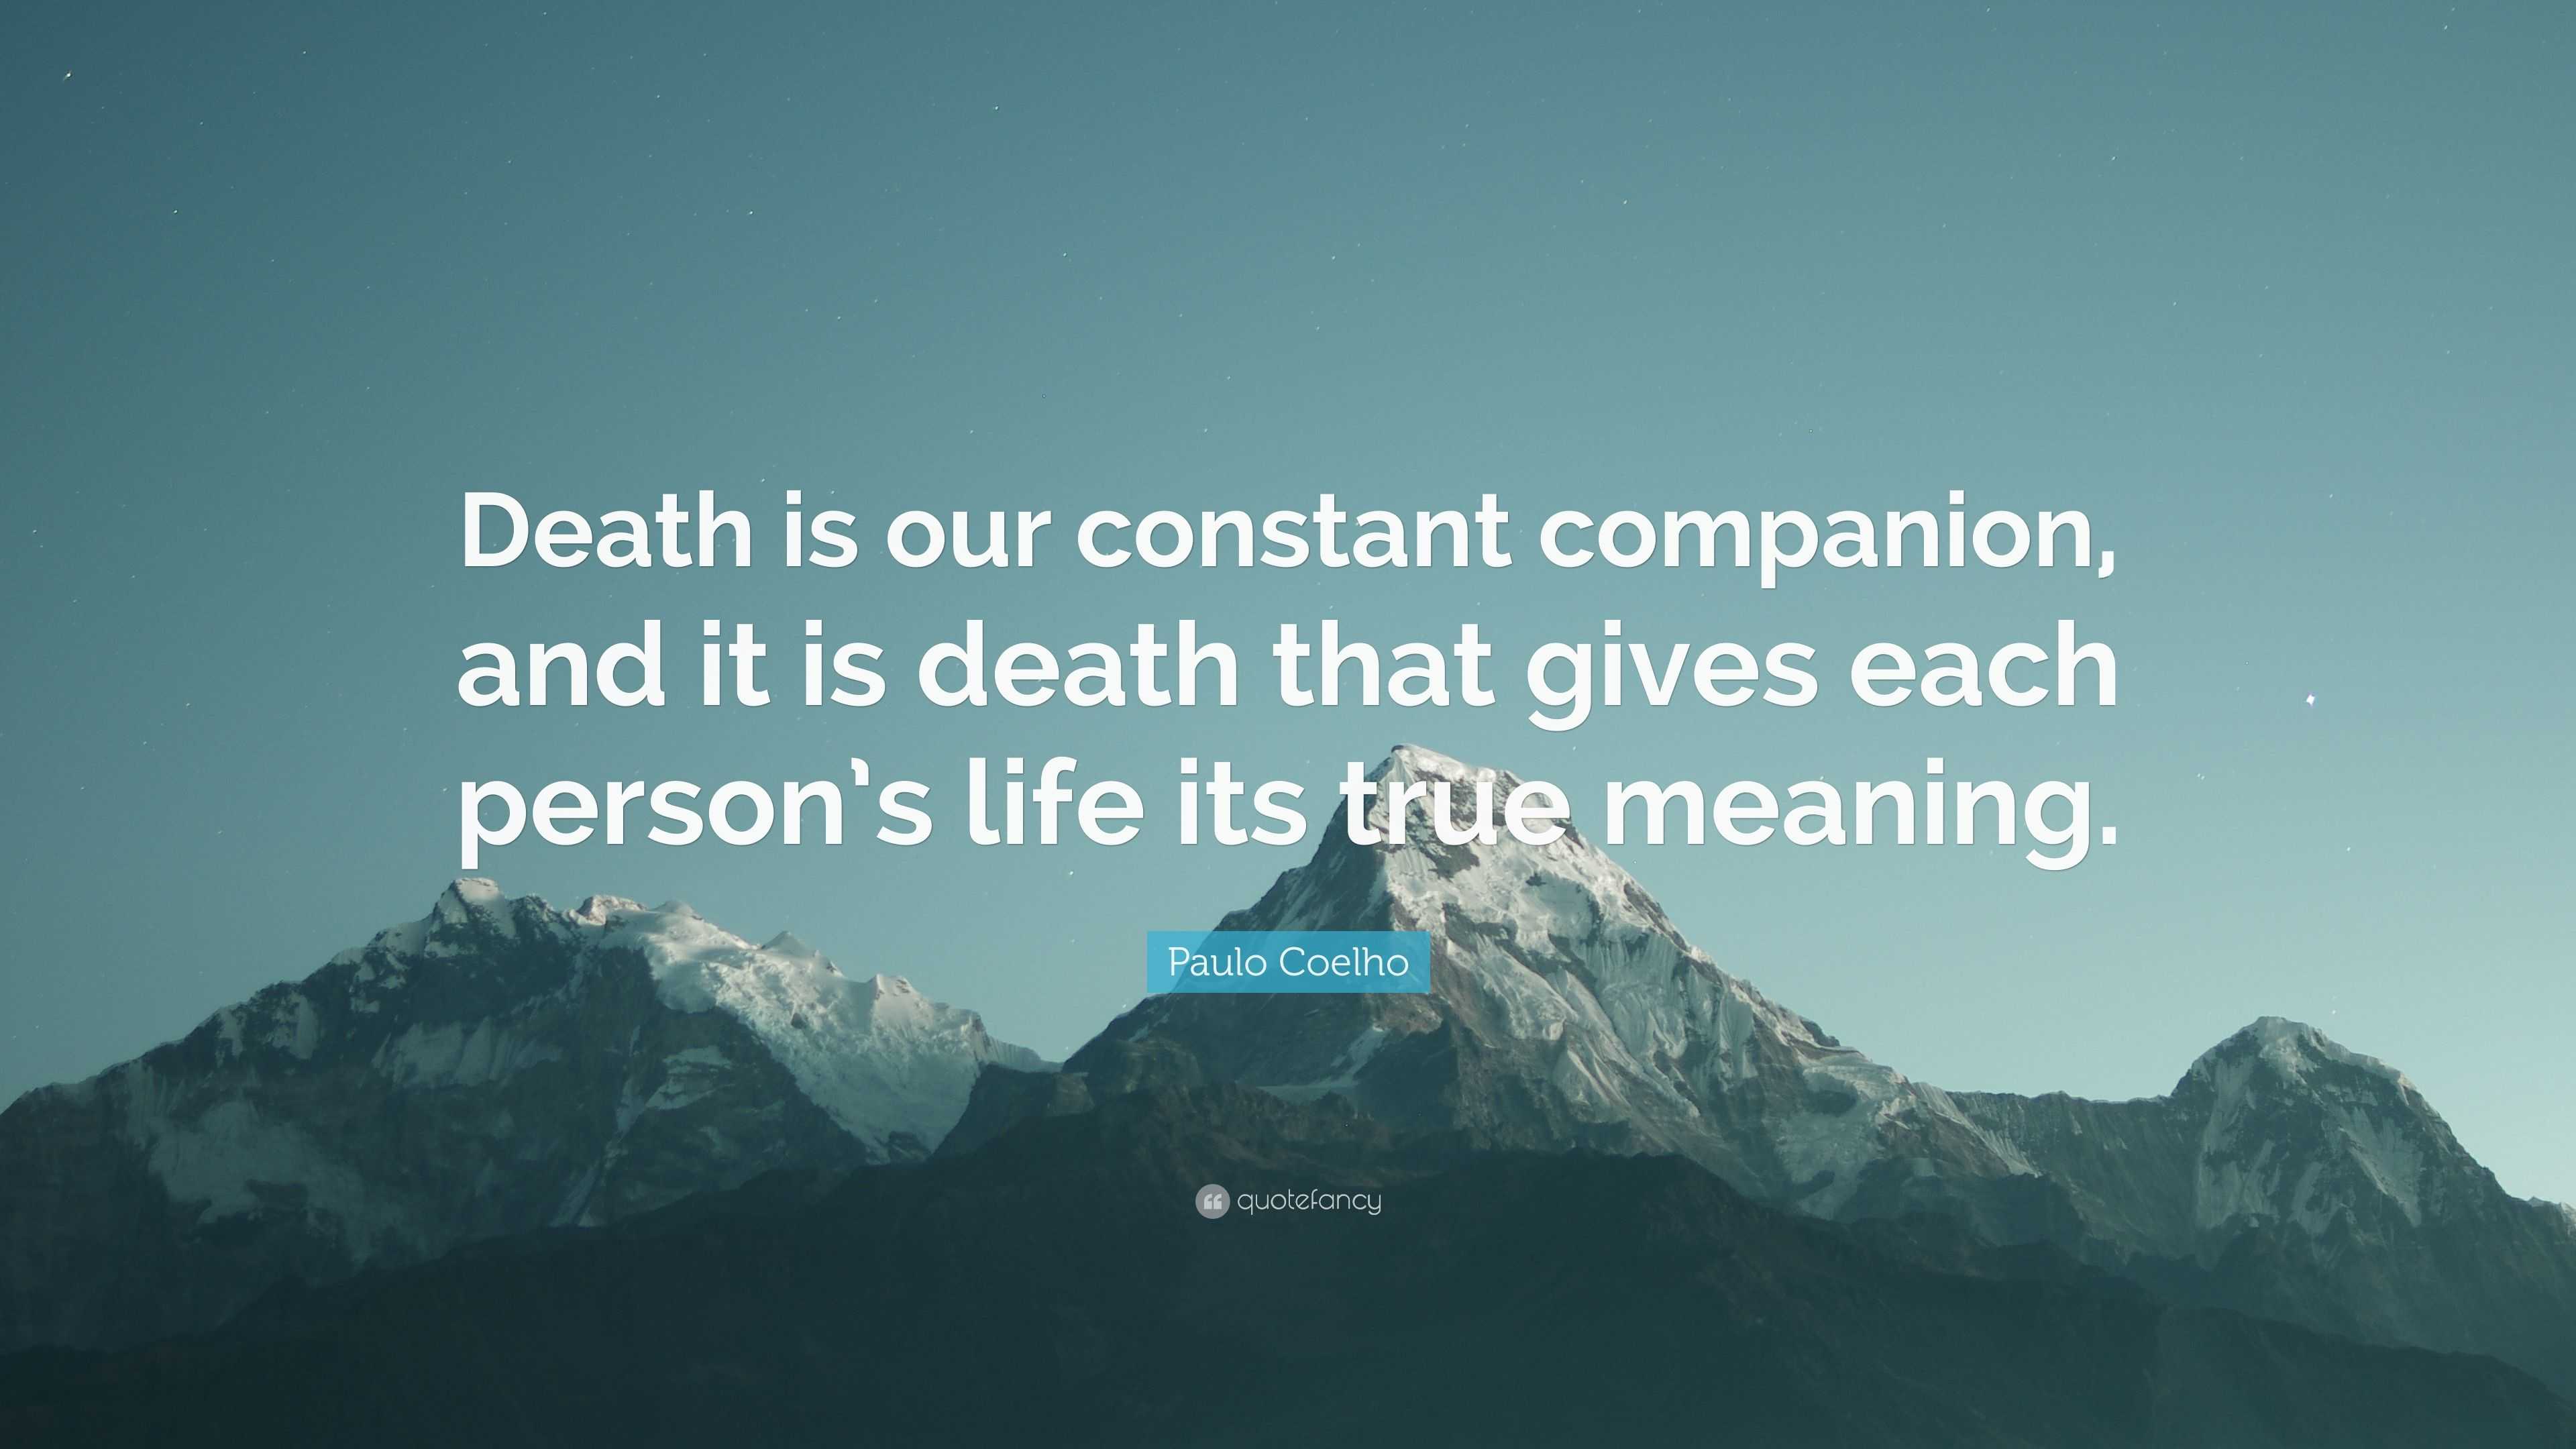 Paulo Coelho Quote: “Death is our constant companion, and it is death ...